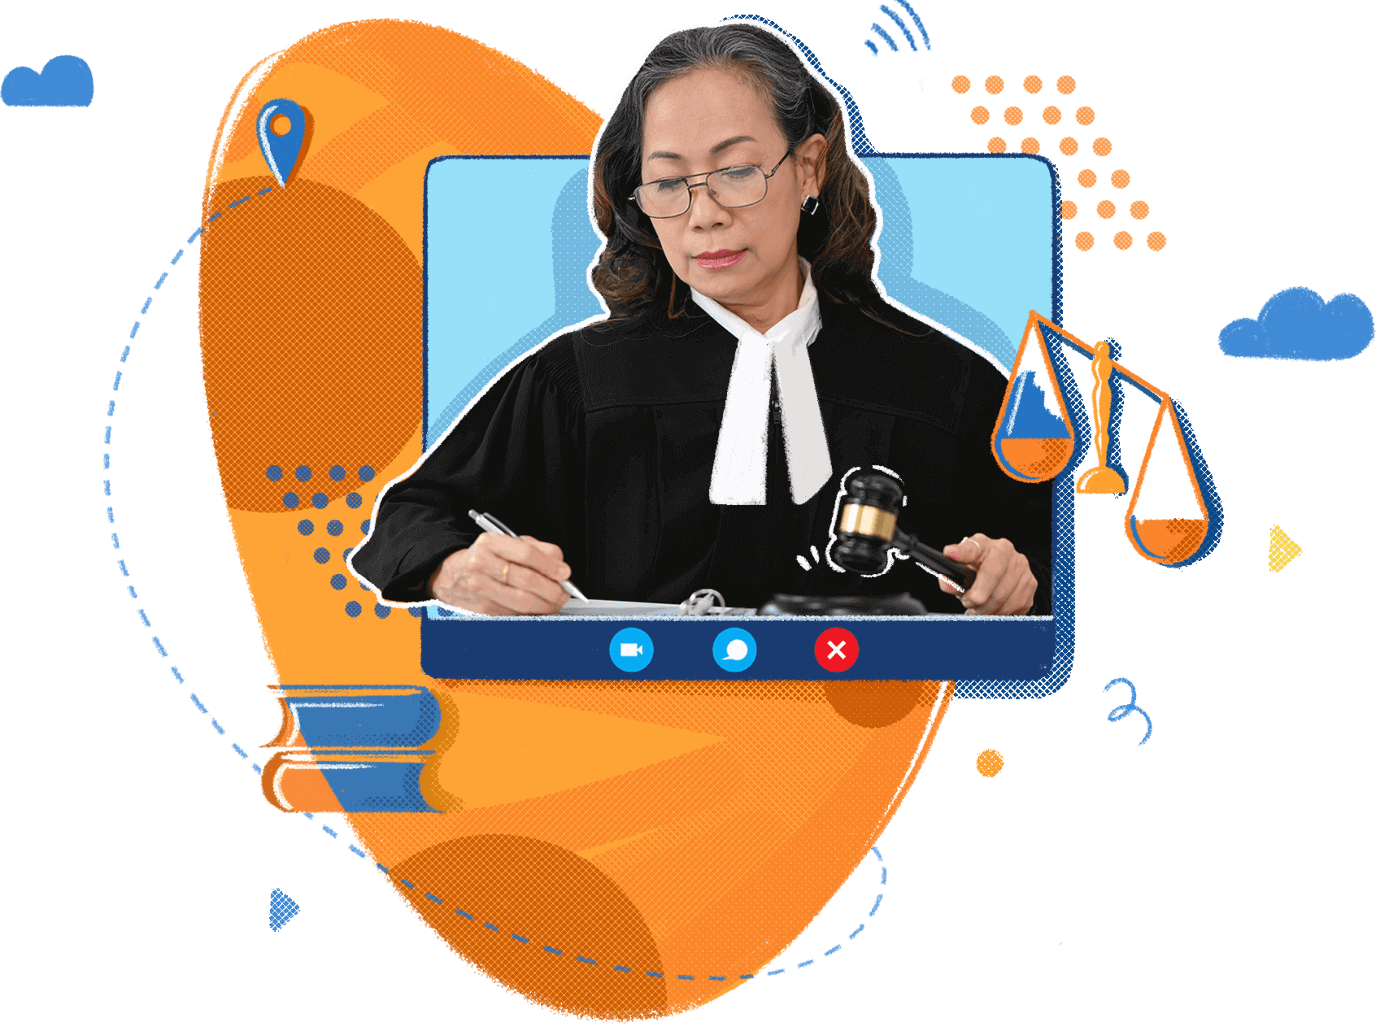 virtual courtroom